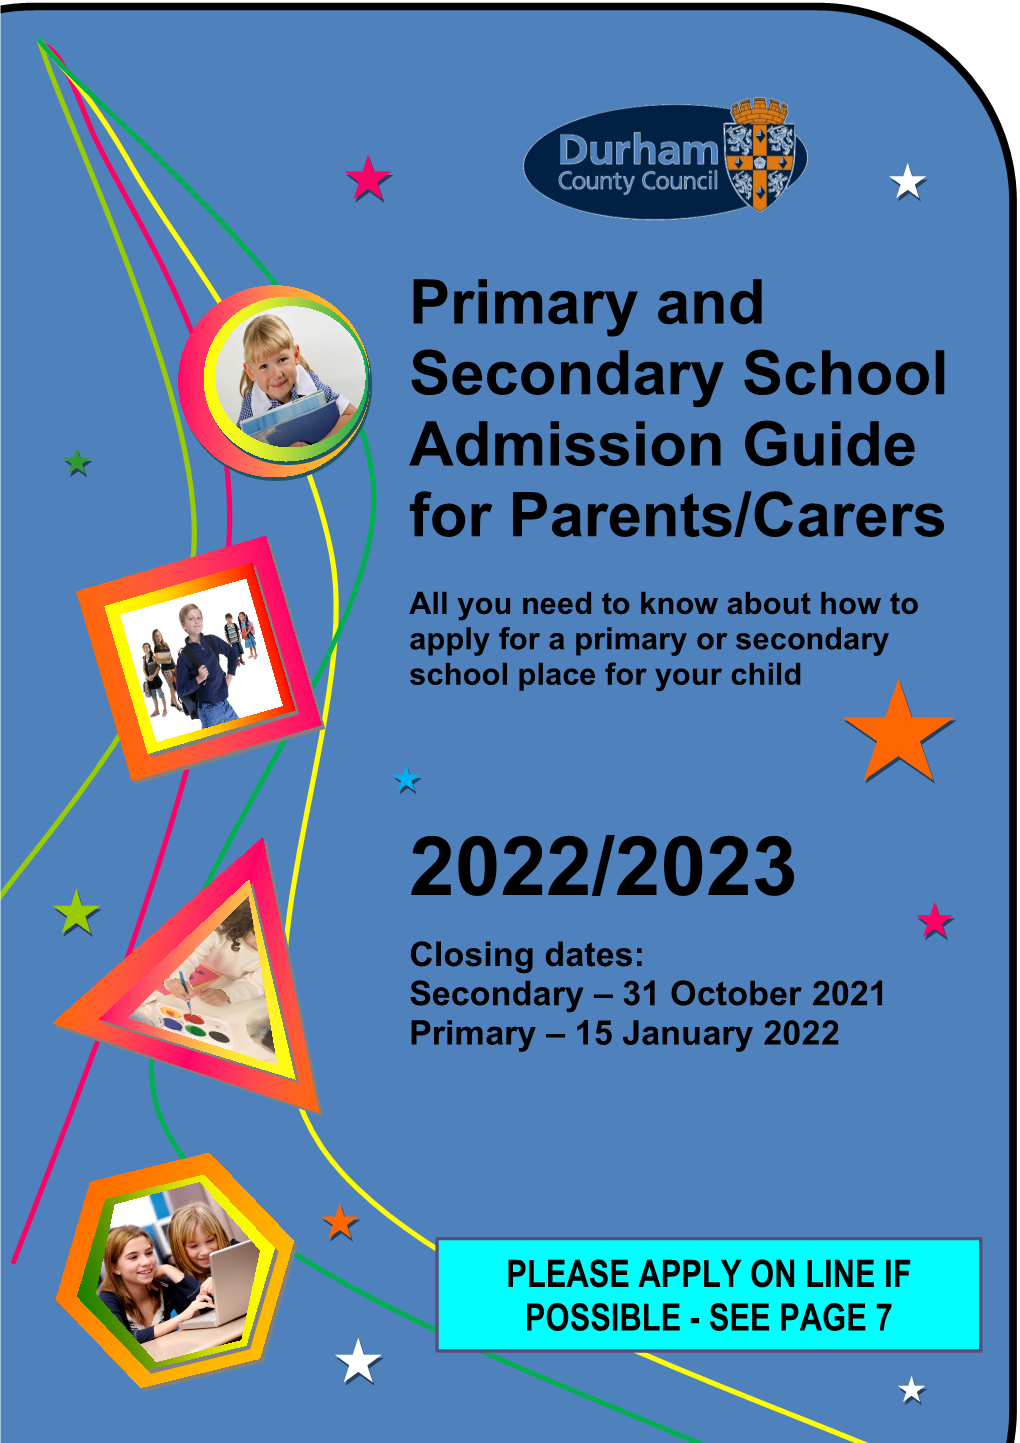 Primary and Secondary School Admission Guide for Parents/Carers